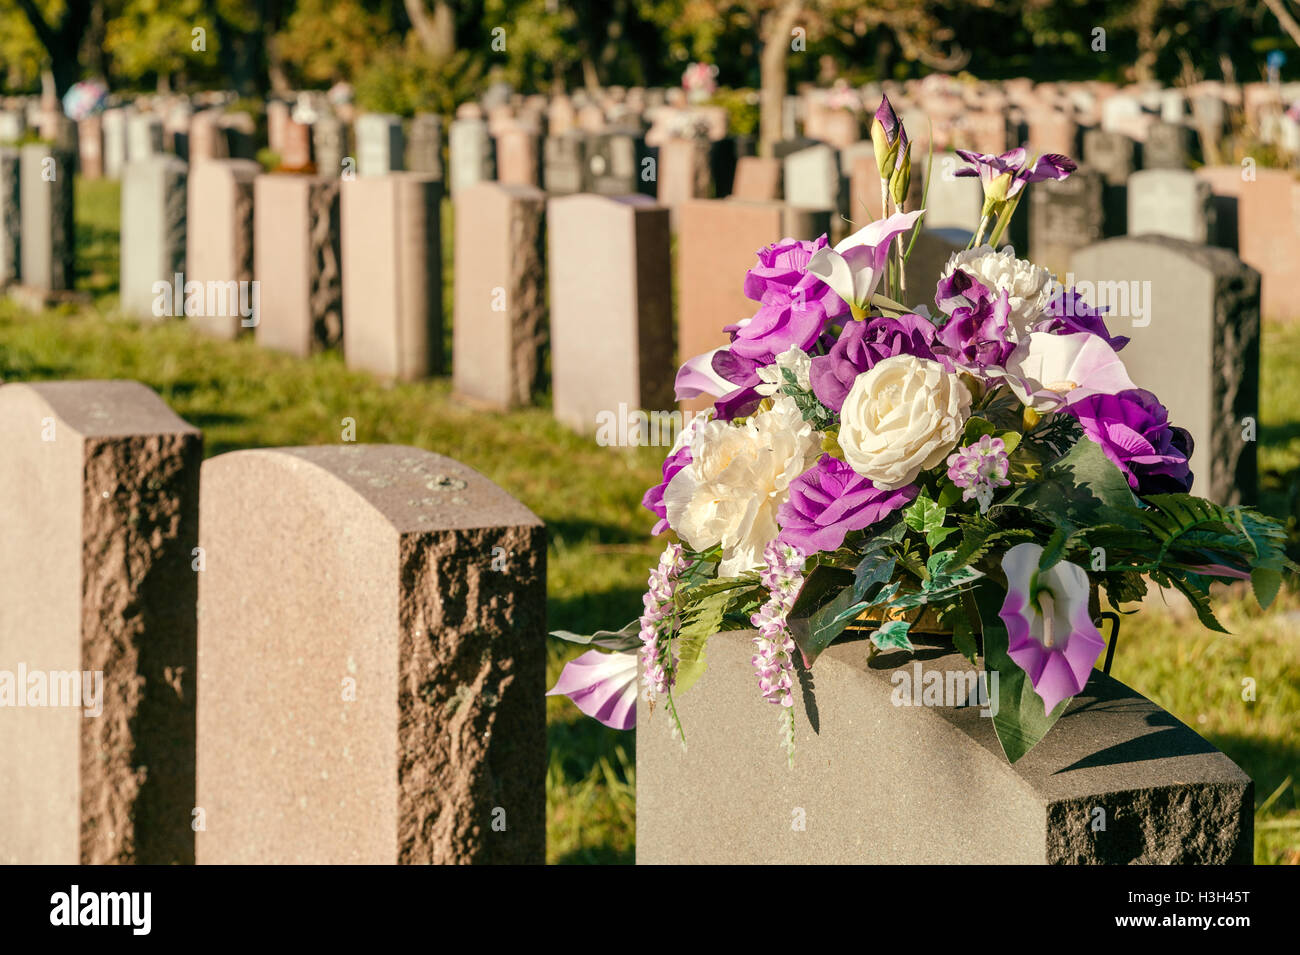 Flowers in a cemetery with headstones in the background at sunset Stock Photo